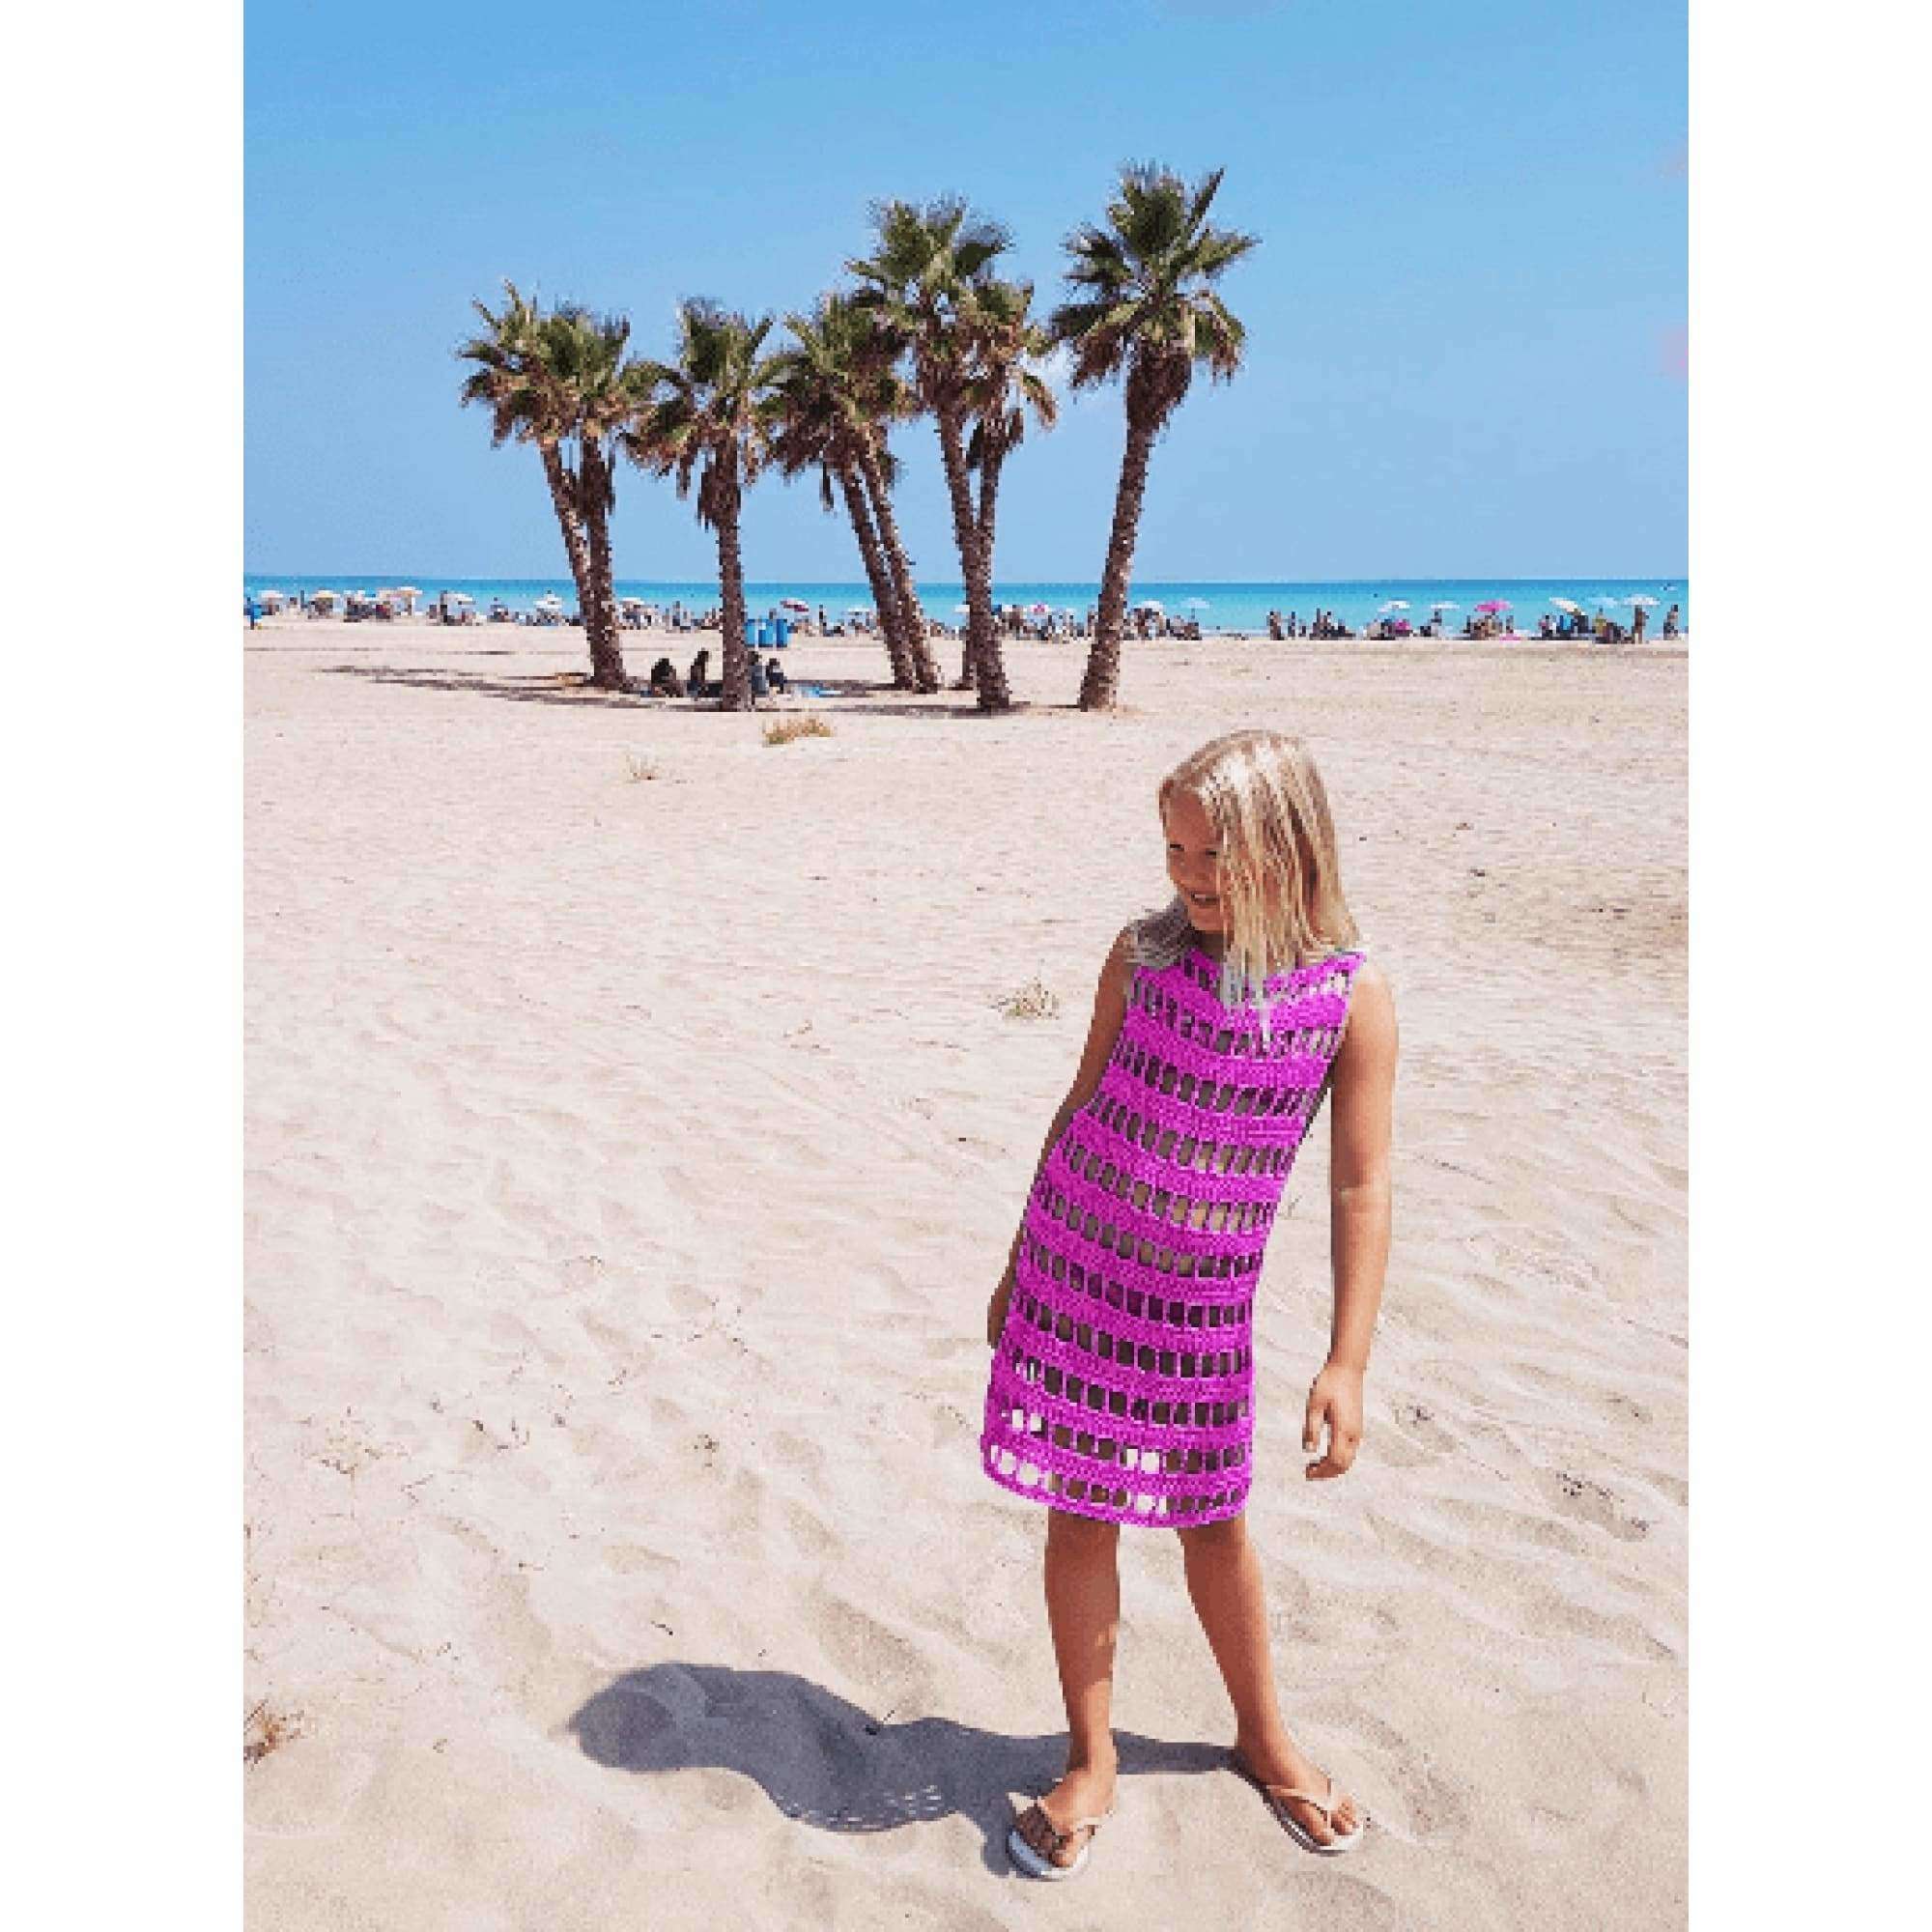 Crochet Pattern - Sunny Days Beach Dress - TheMailoDesign - Dresses, Tops & Skirts - TheMailoDesign